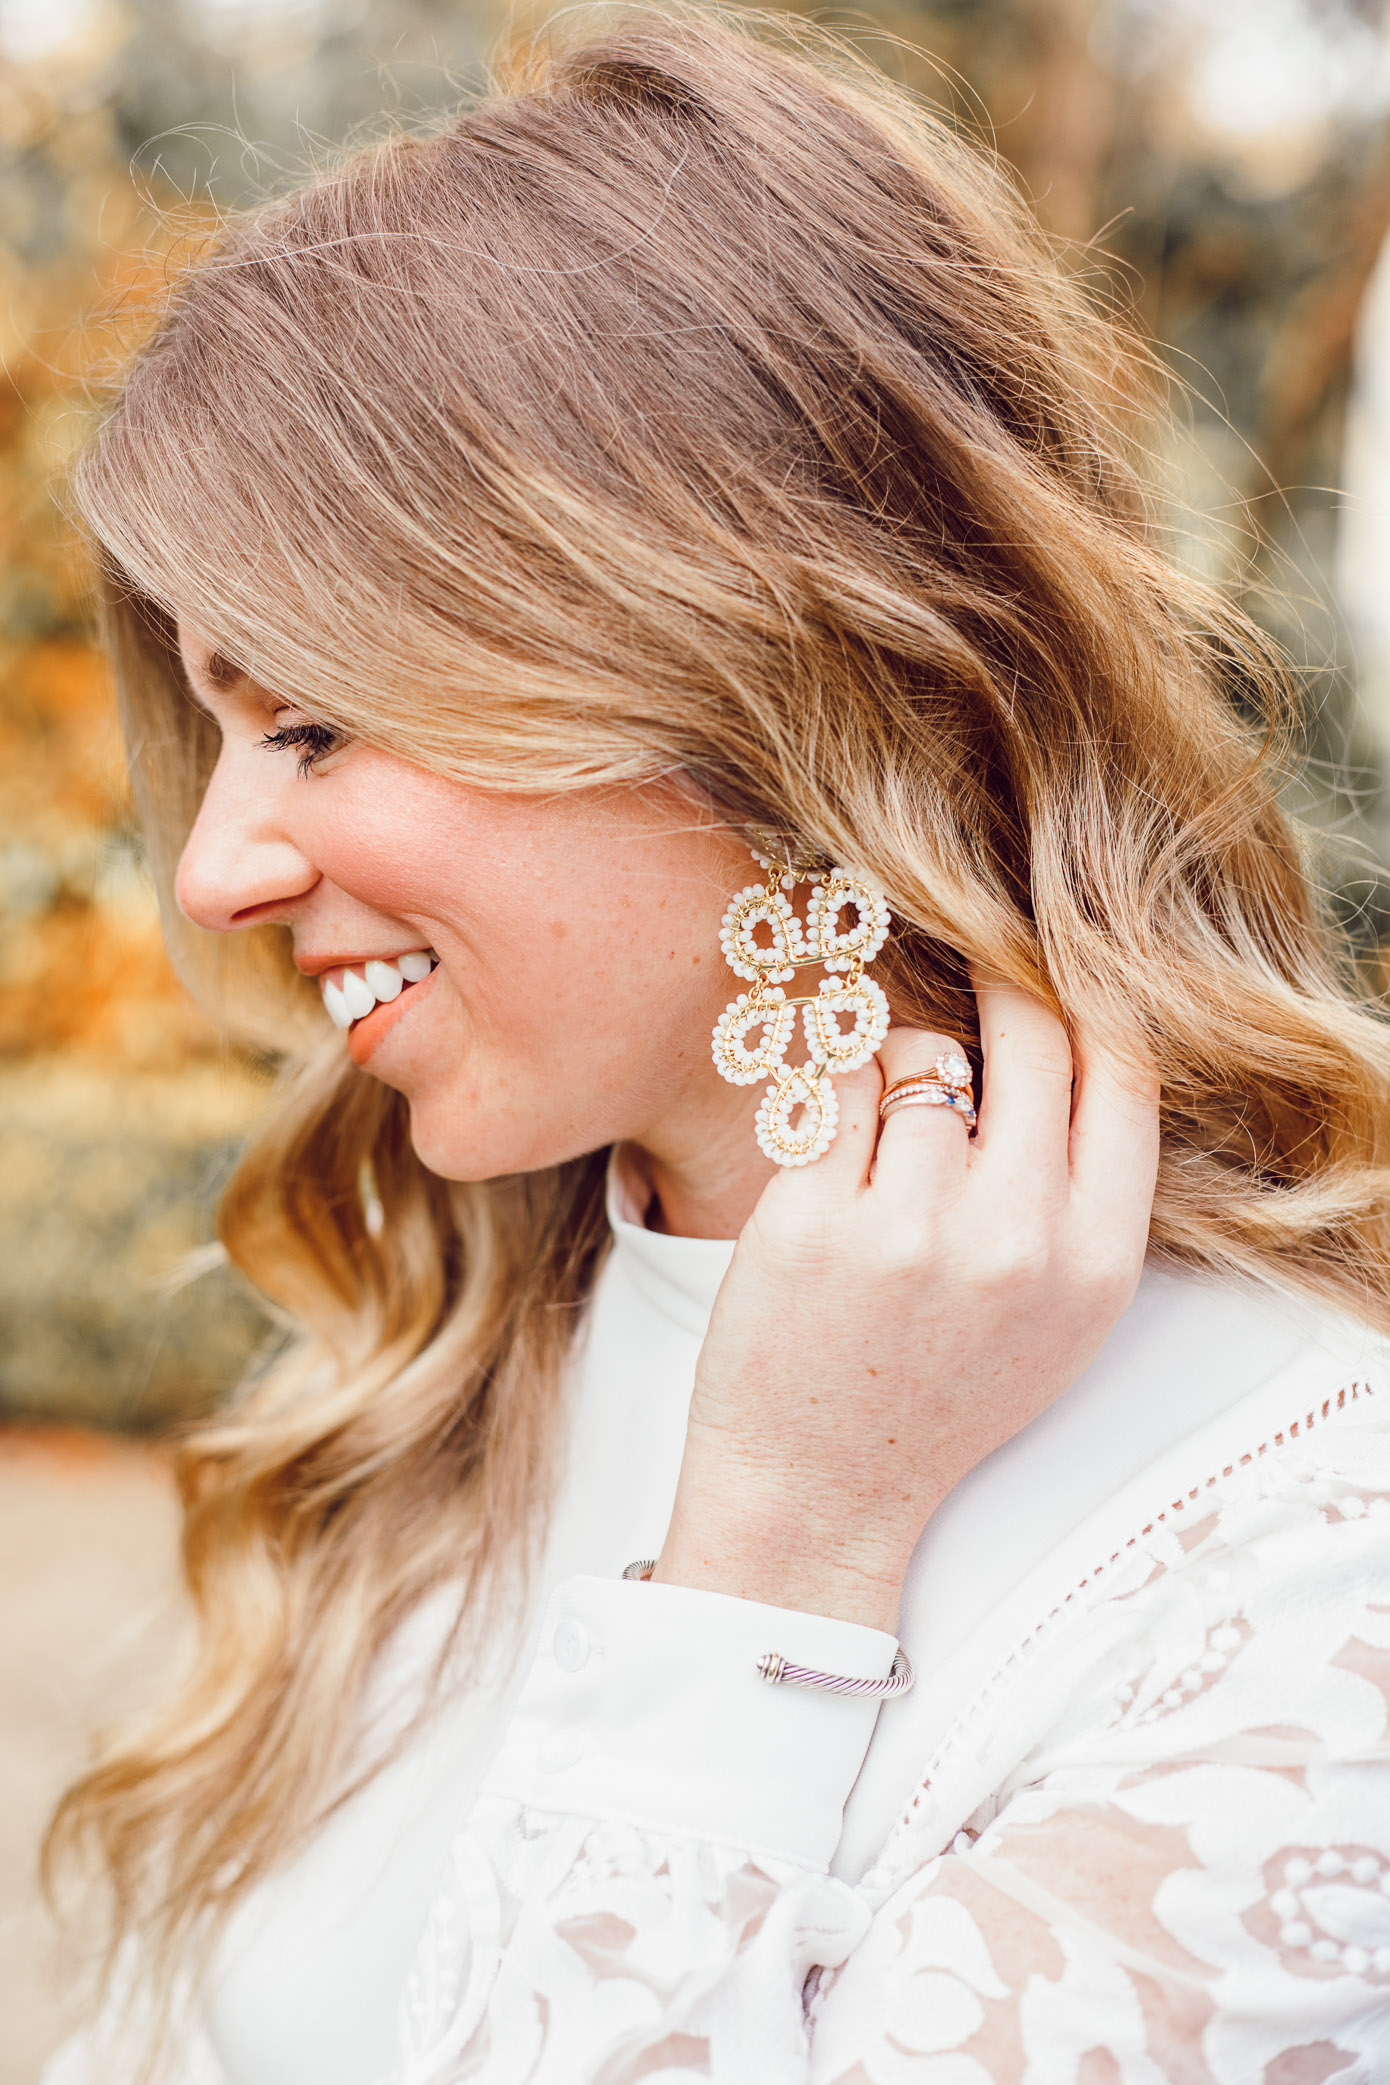 Lisi Lerch Ginger Statement Earrings | White and Gold Statement Earrings | Bridal Style featured on Louella Reese